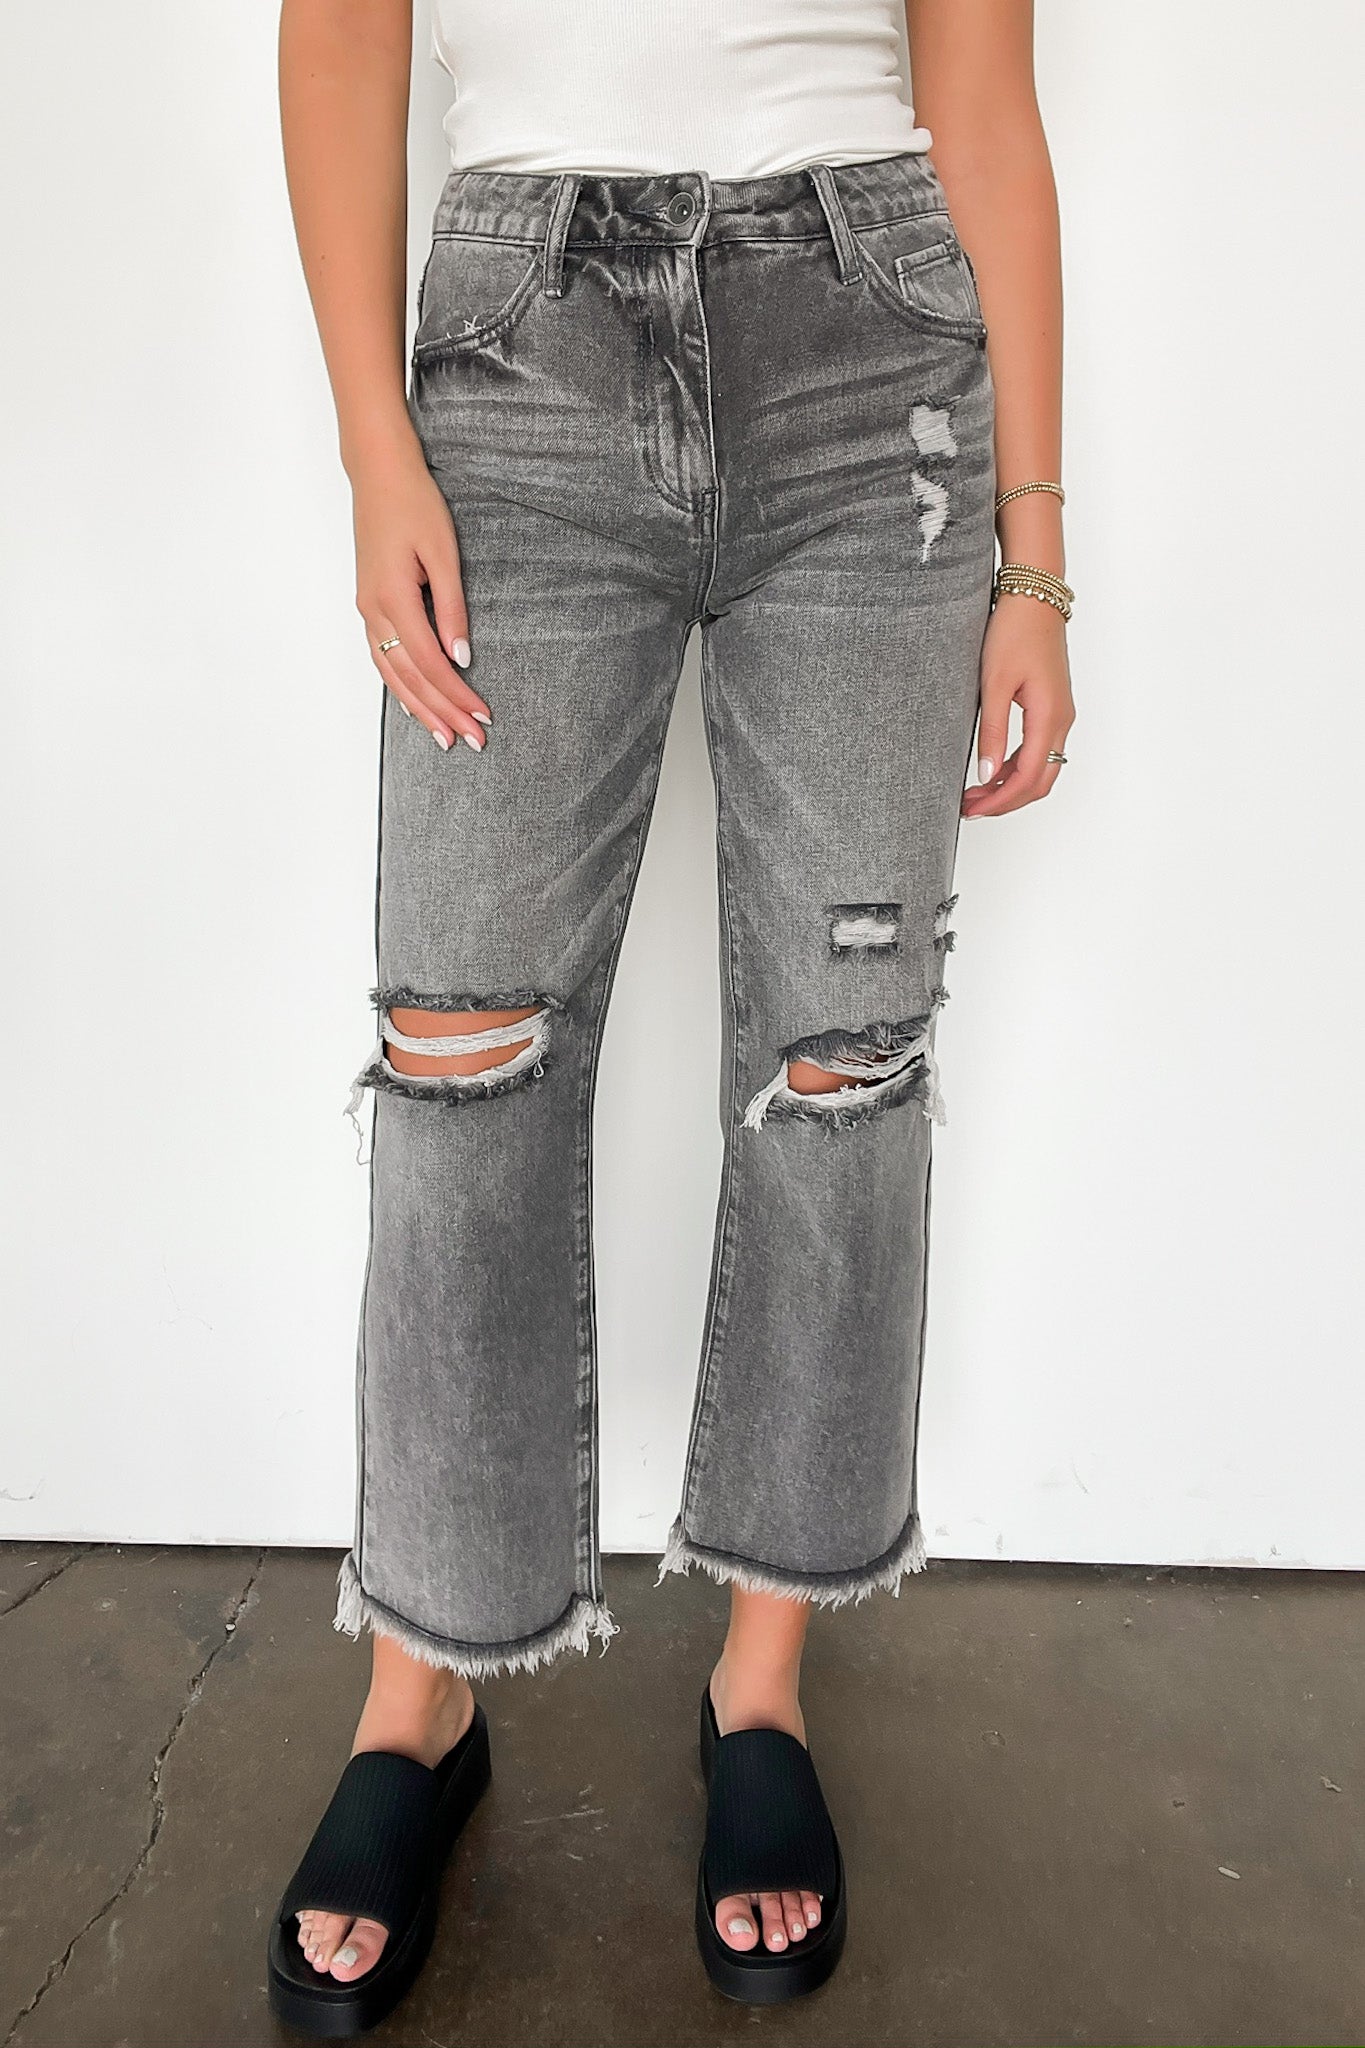 1 / Gray Baylee High Rise Distressed Mom Jeans - Madison and Mallory